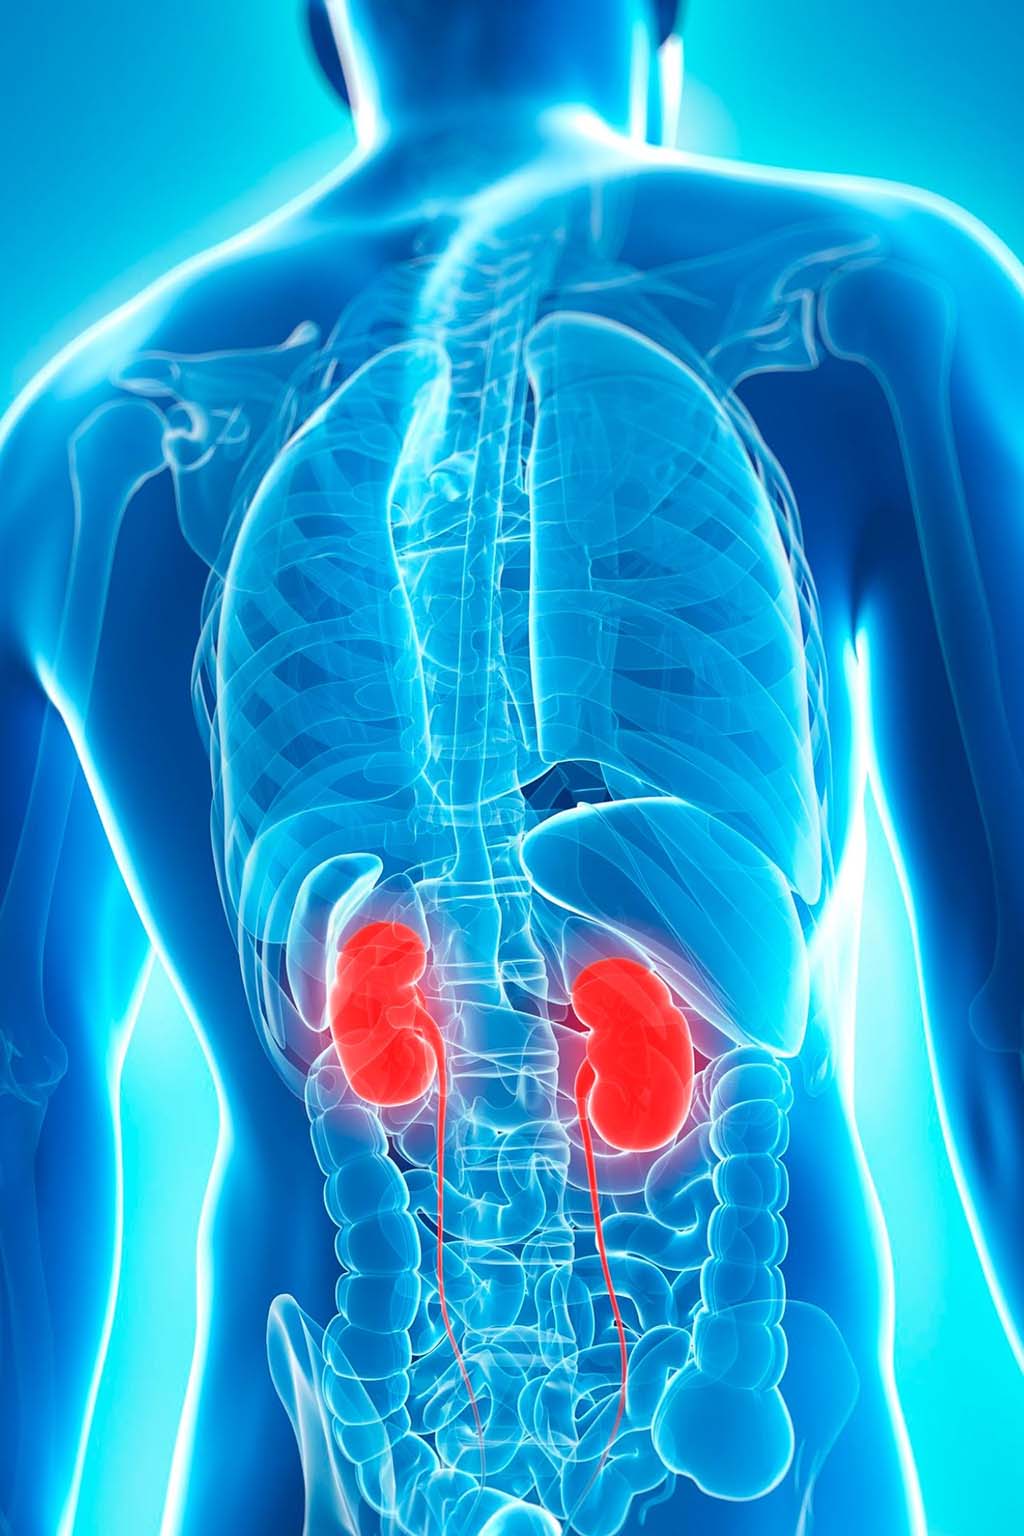 Illustration of translucent man with kidneys highlighted signifying chronic kidney disease, end state renal disease or chronic renal failure